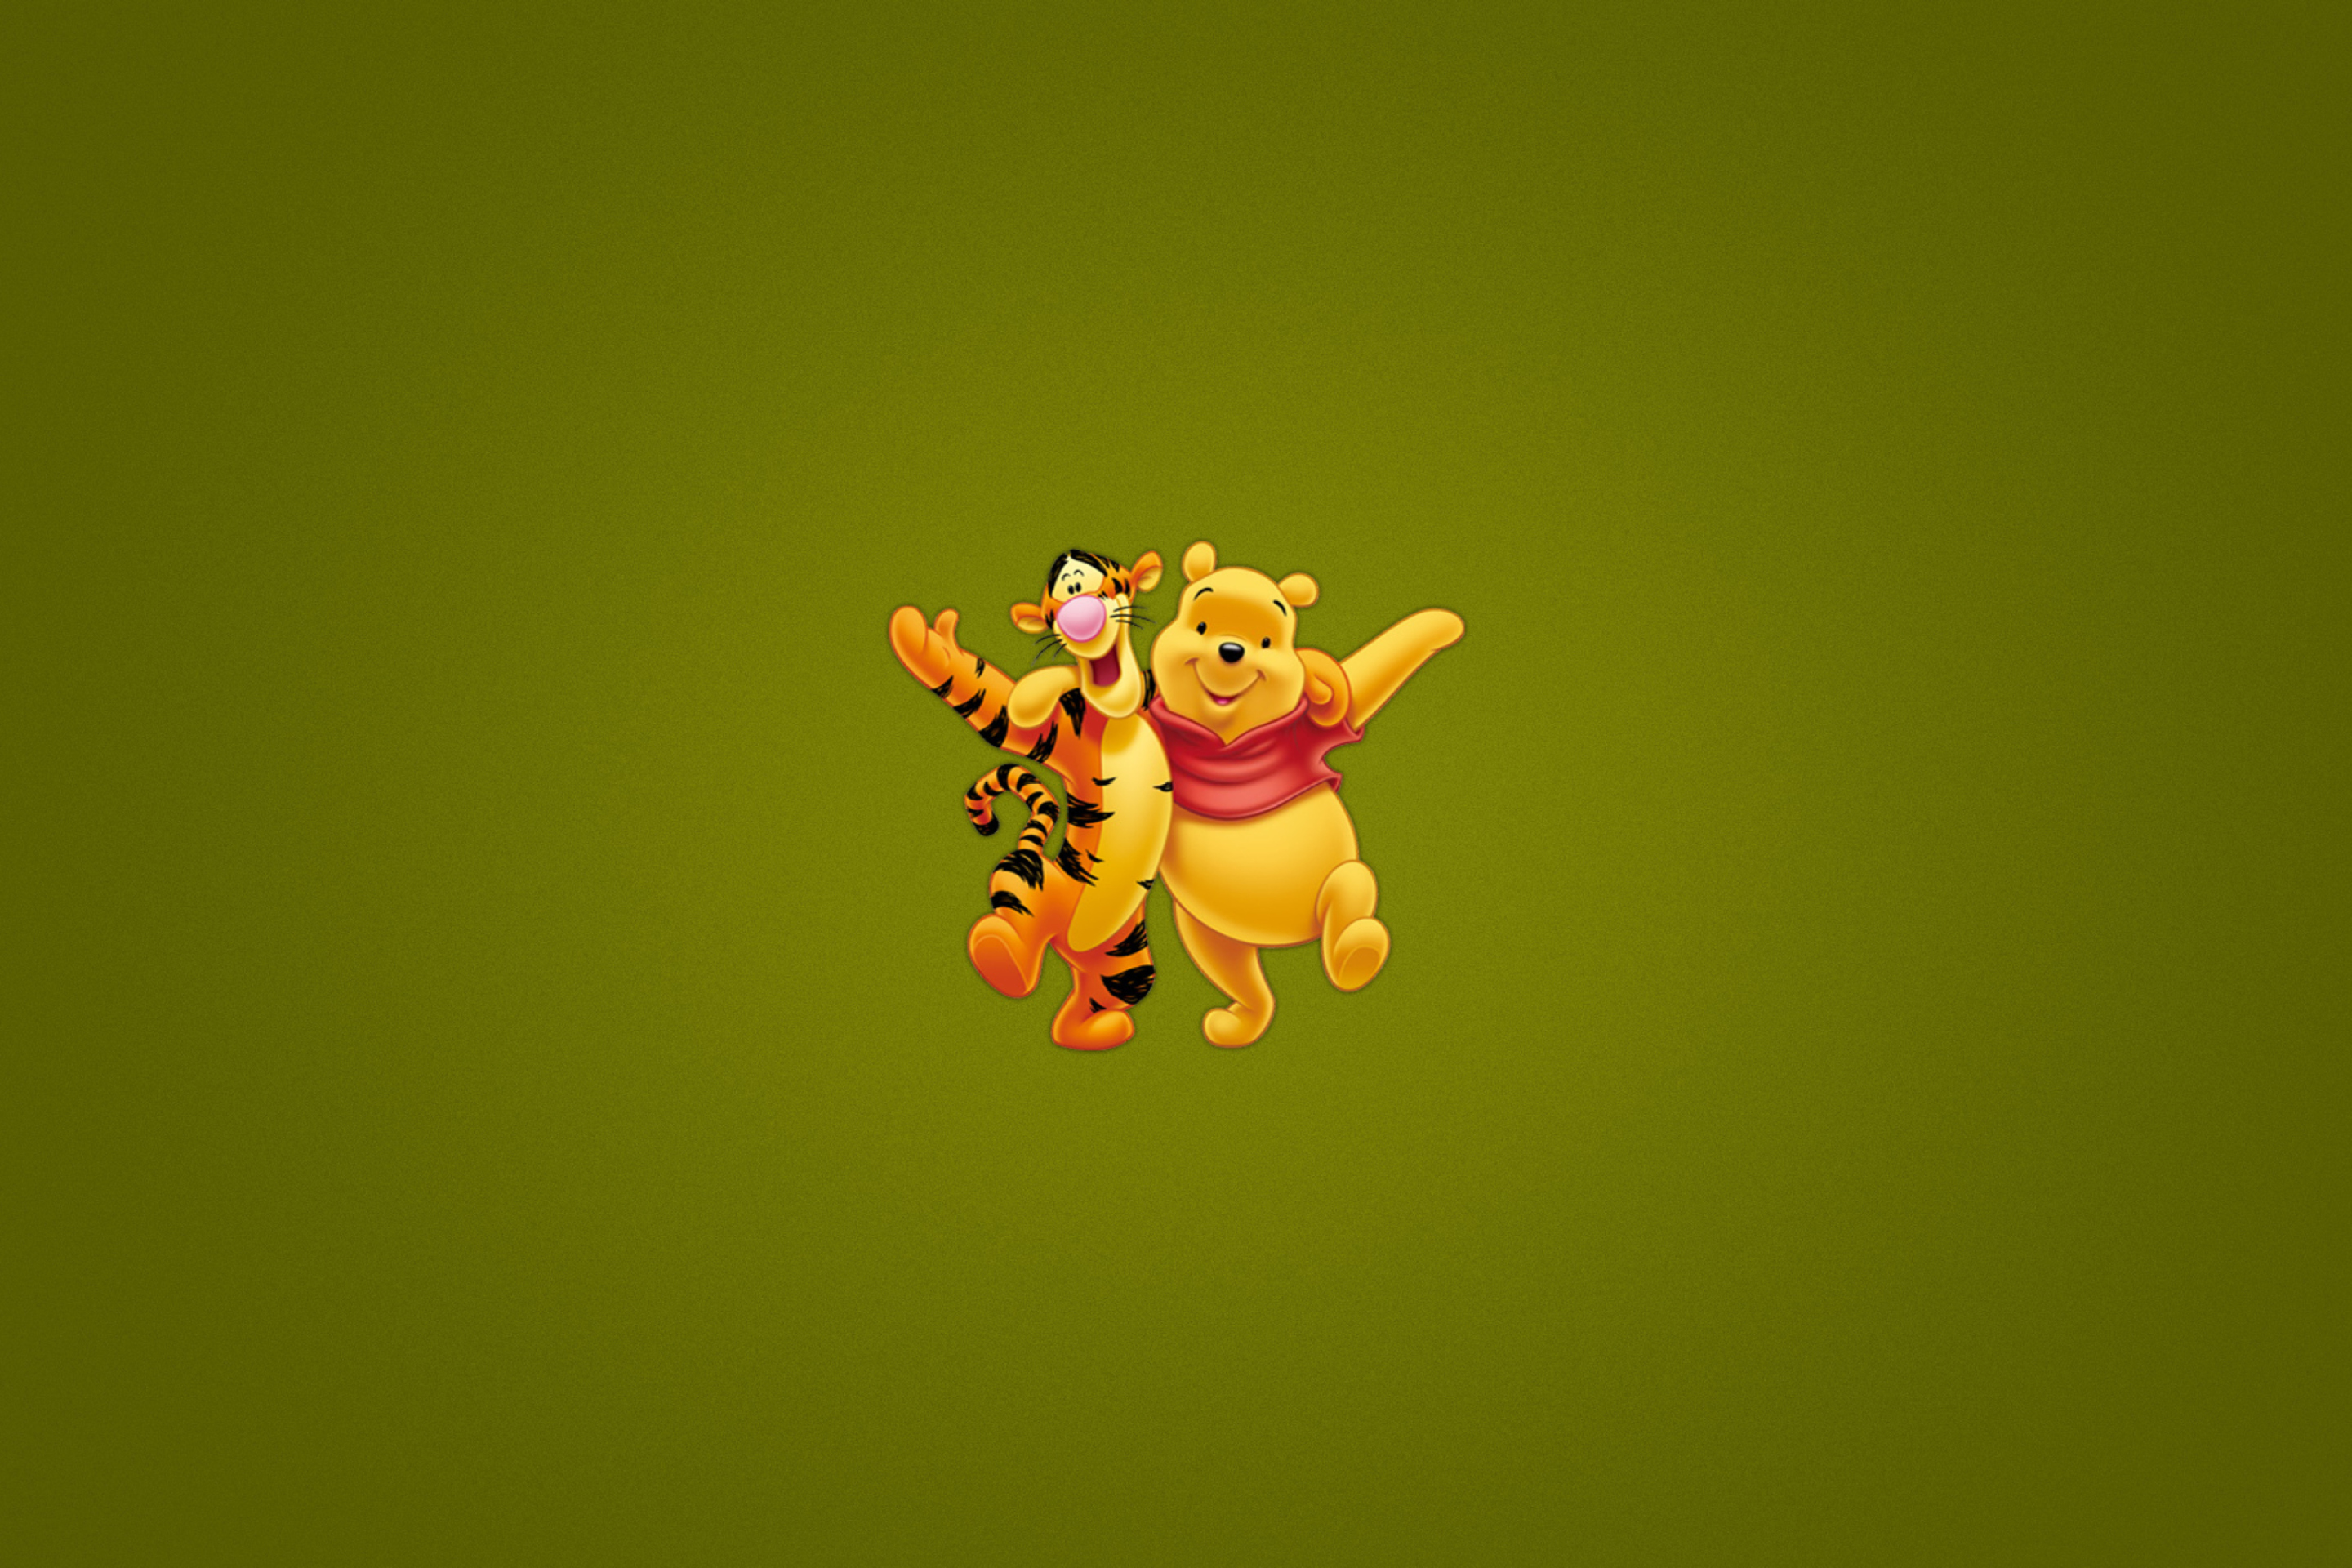 Winnie The Pooh And Tiger wallpaper 2880x1920